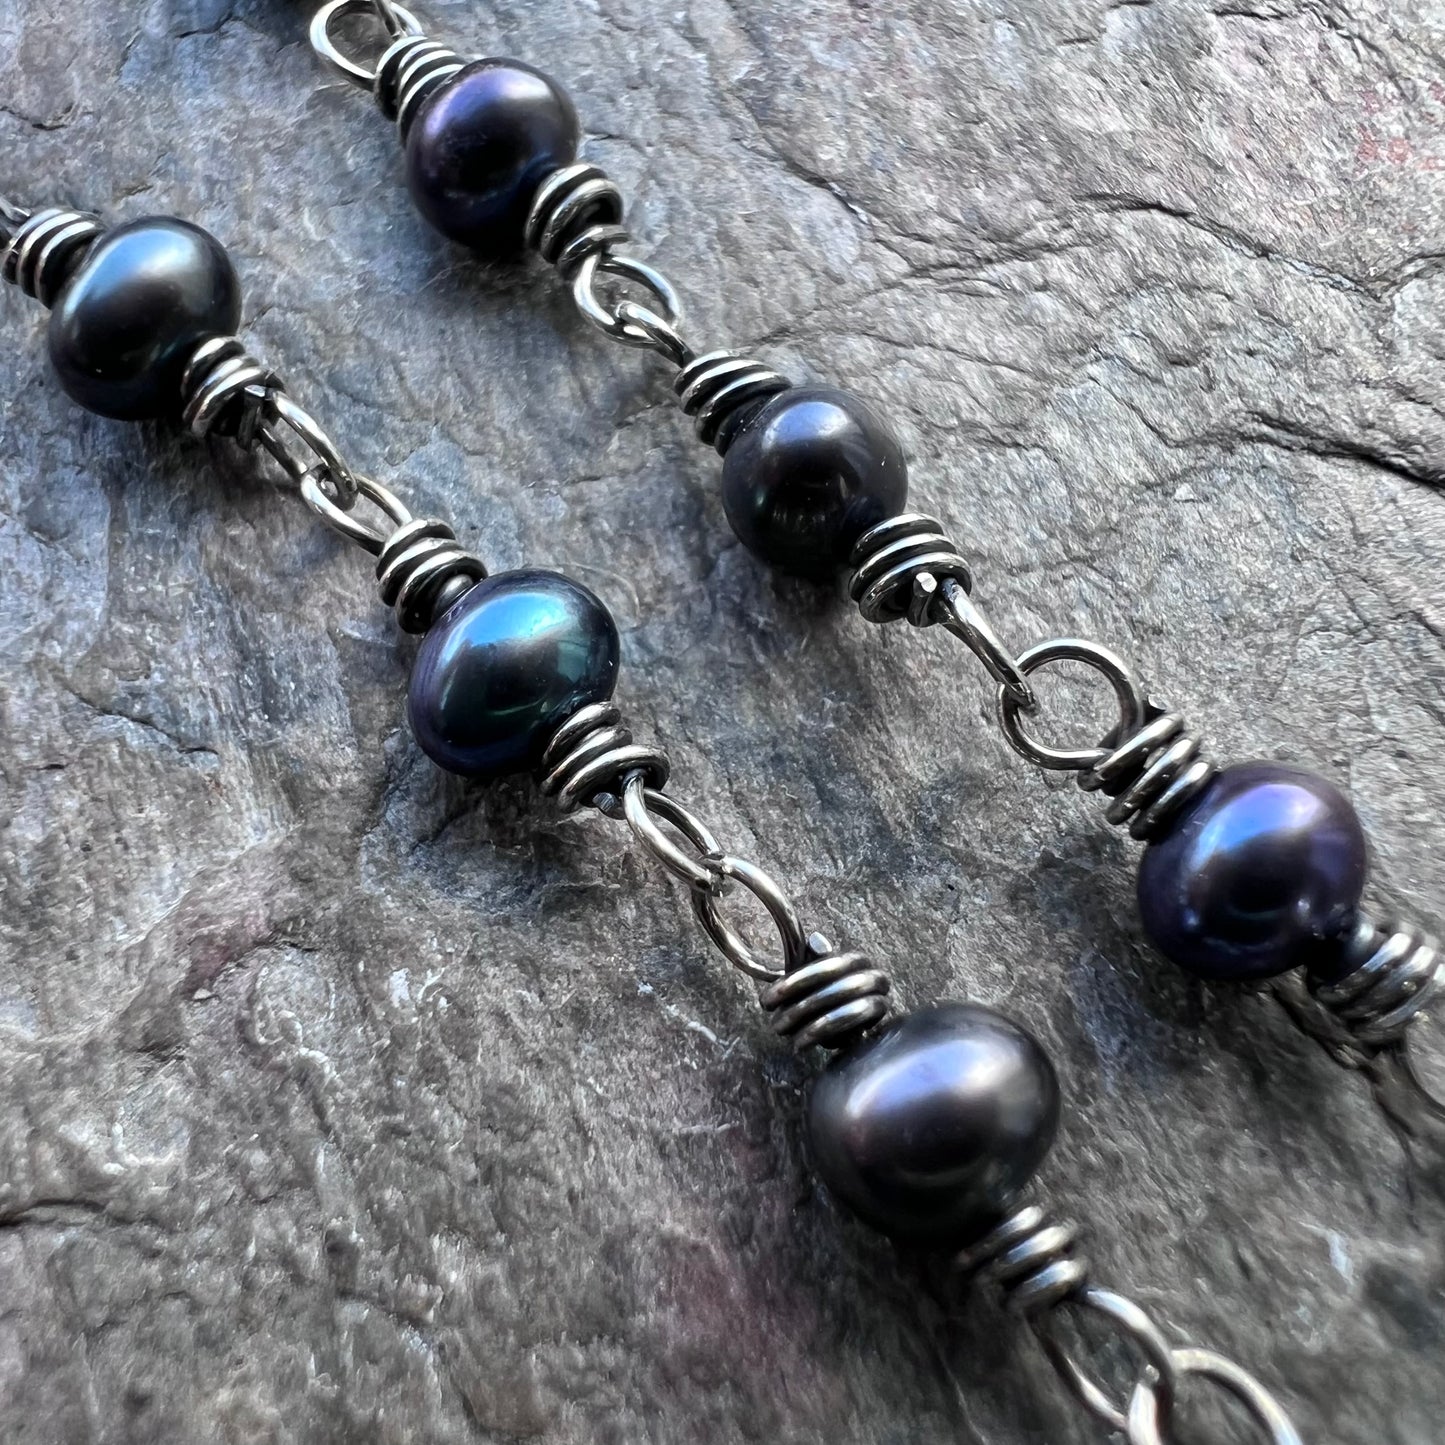 Sterling Silver and Black Pearl Earrings - Genuine Pearls Wrapped in Sterling Silver Wire